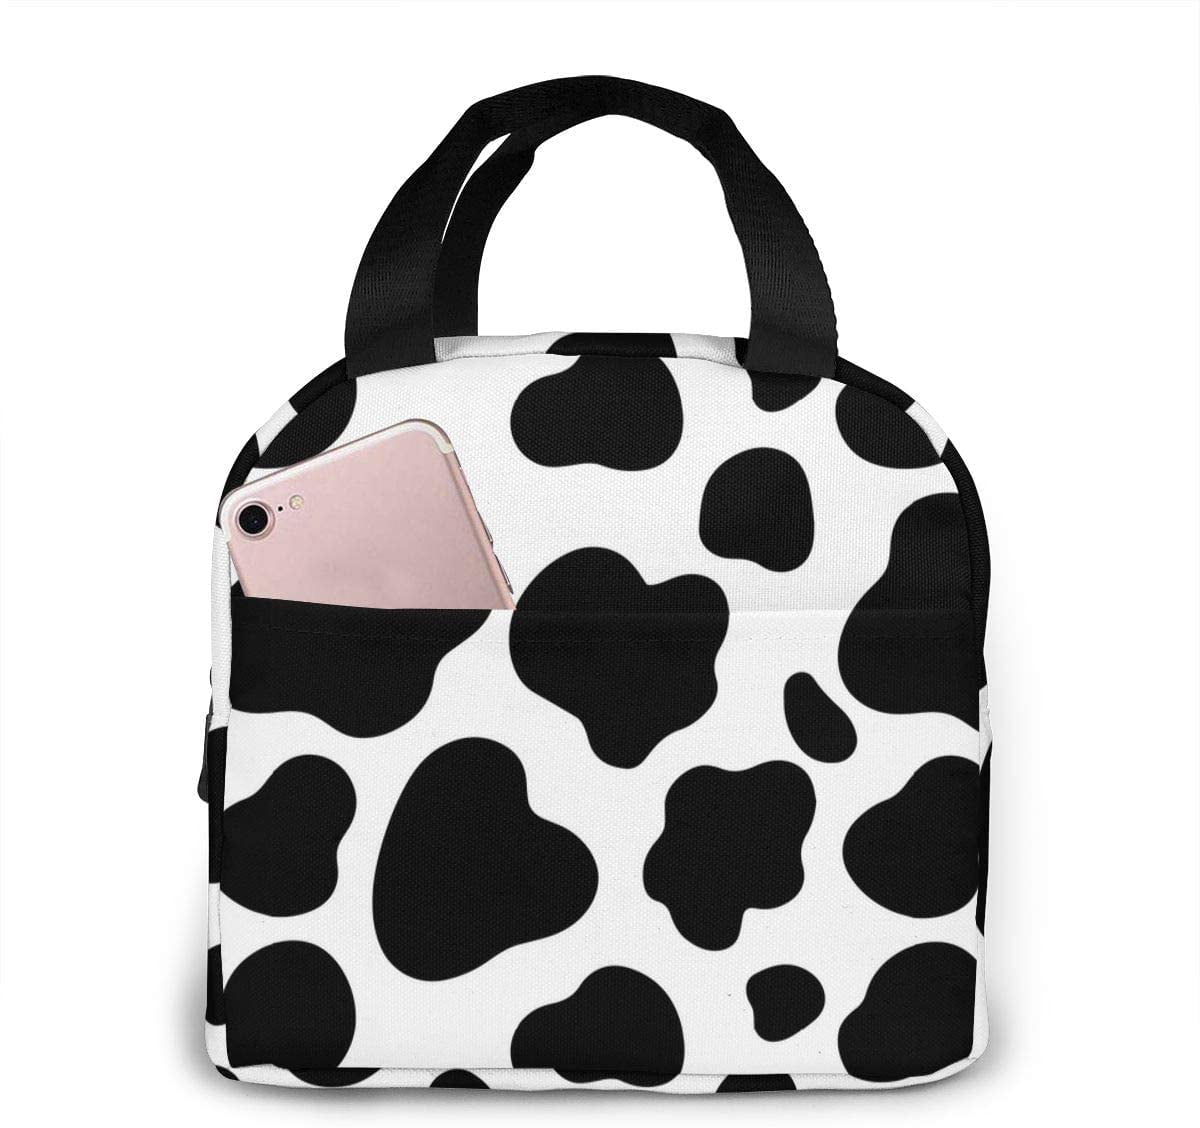 Faty-T Cows Print Lunch Bag Insulated Lunch Box Cooler Tote For Picnic ...